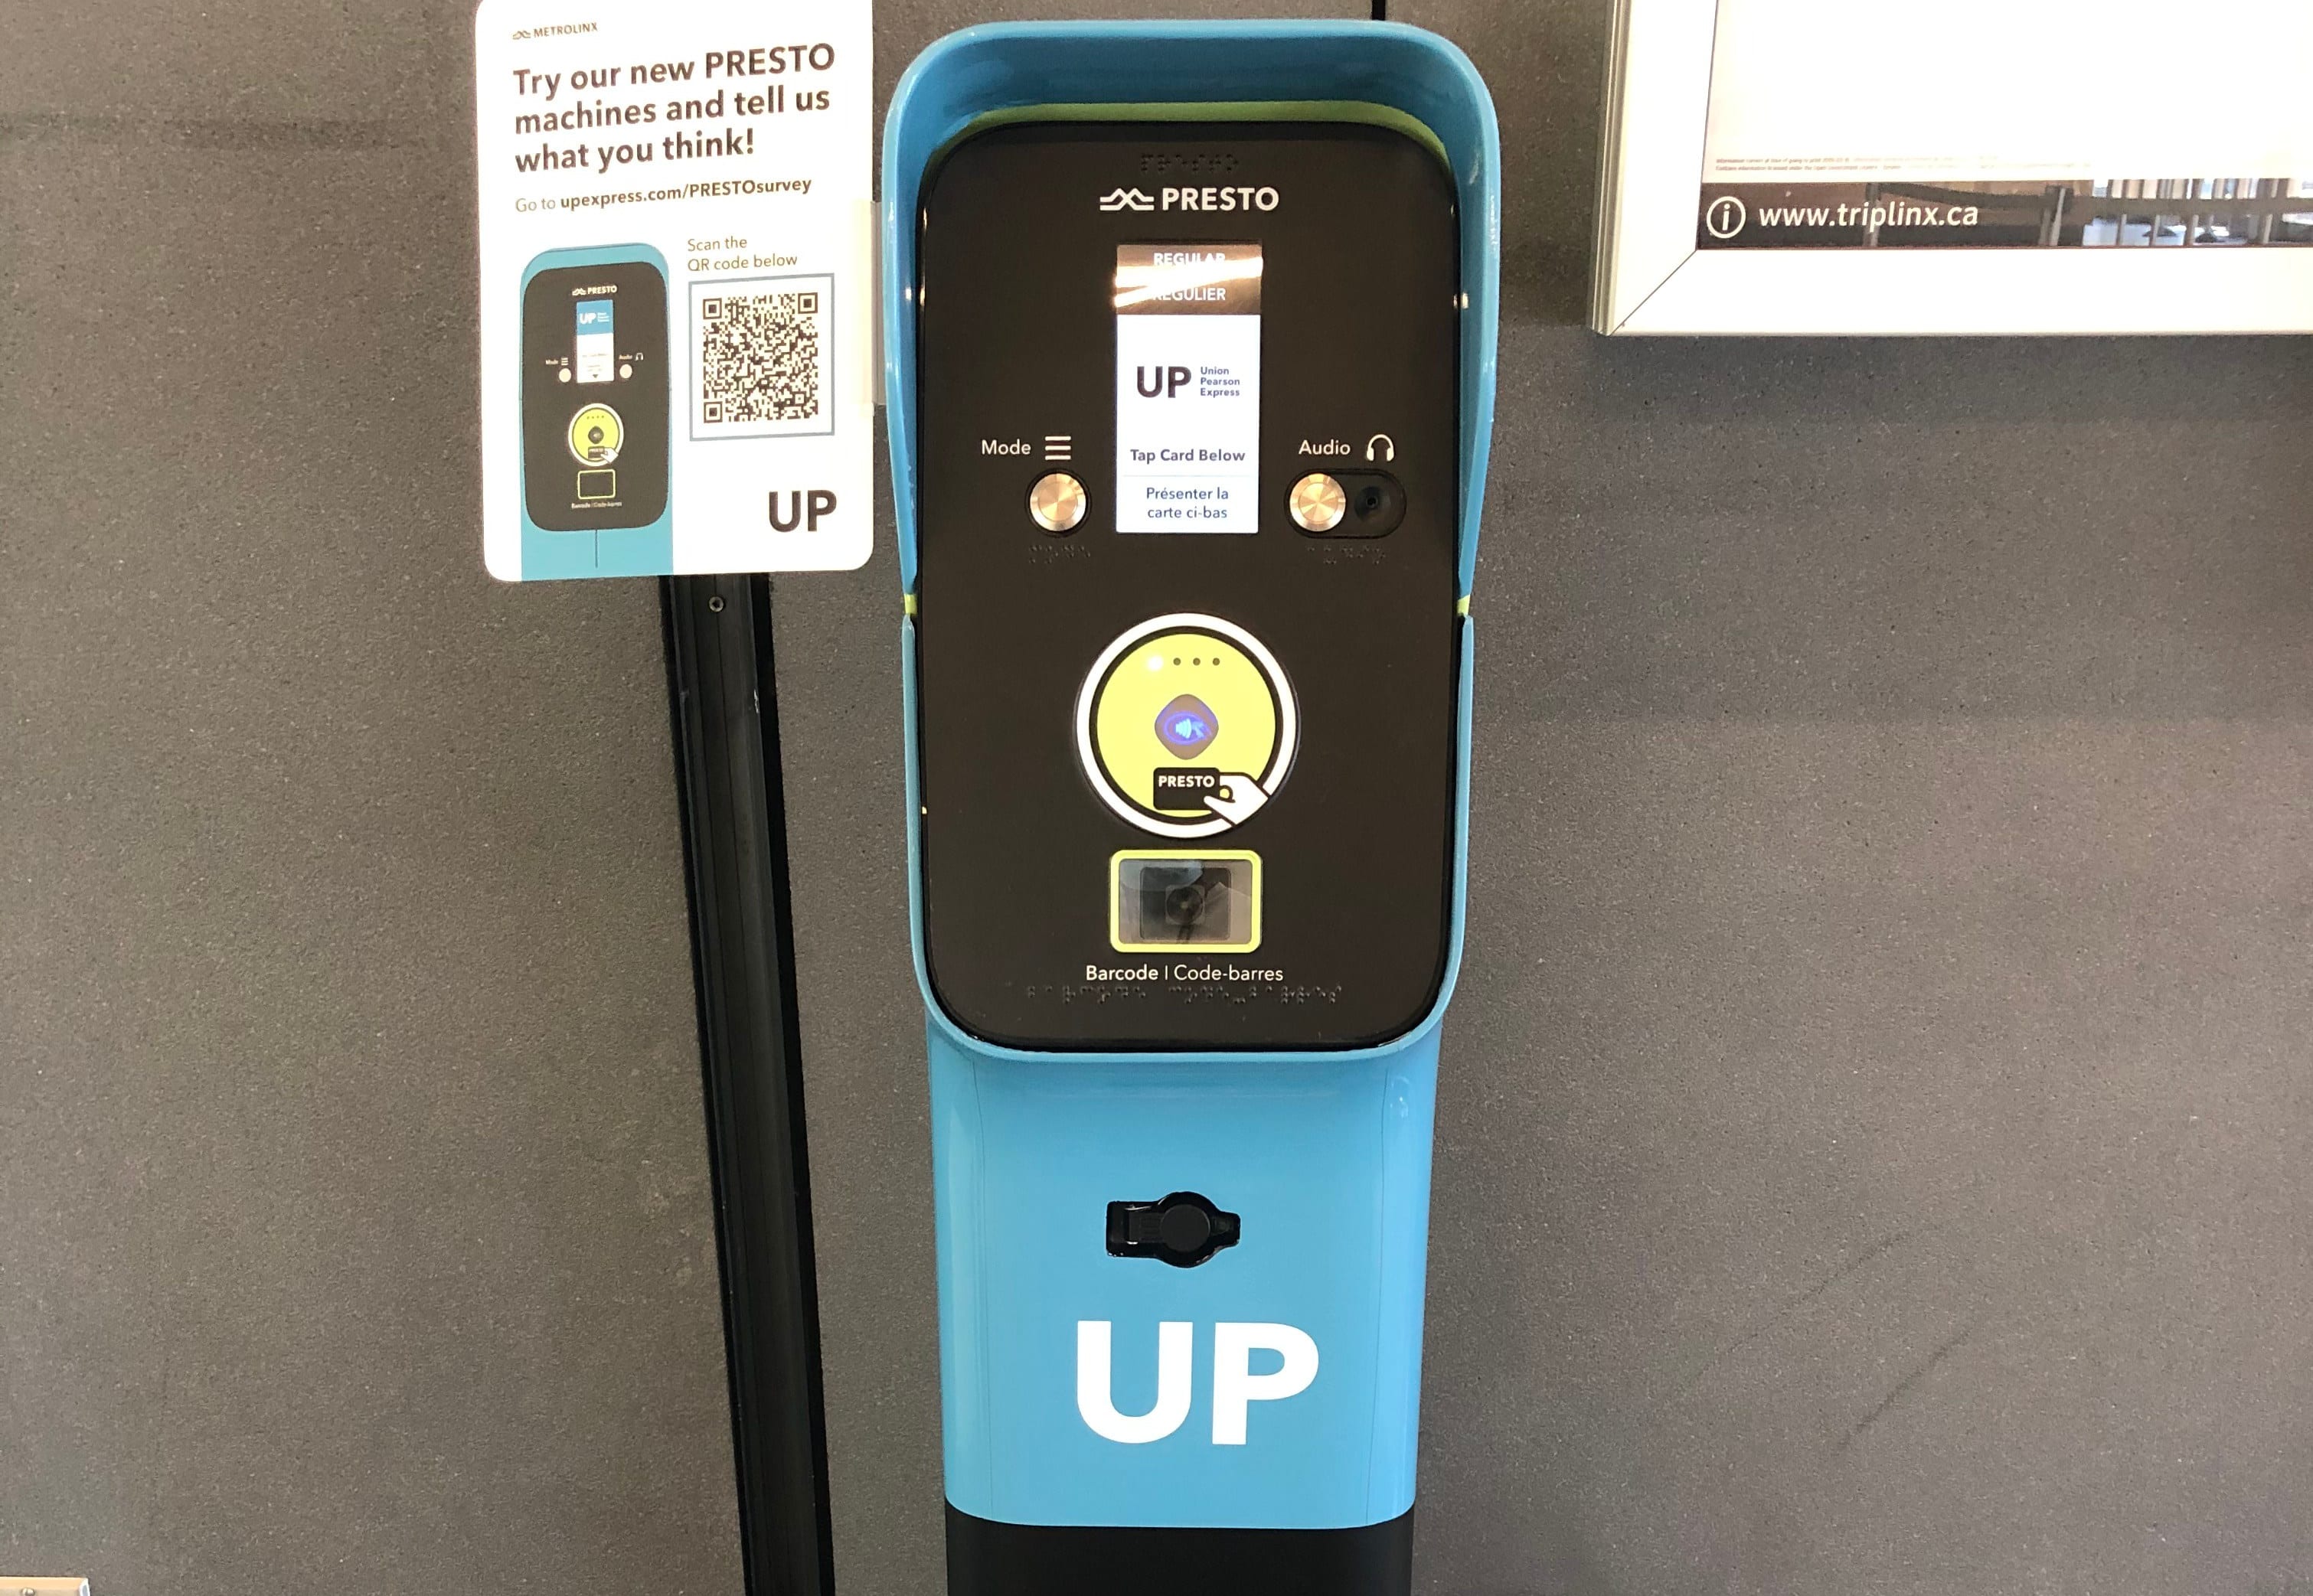 the new PRESTO devices at UP Express